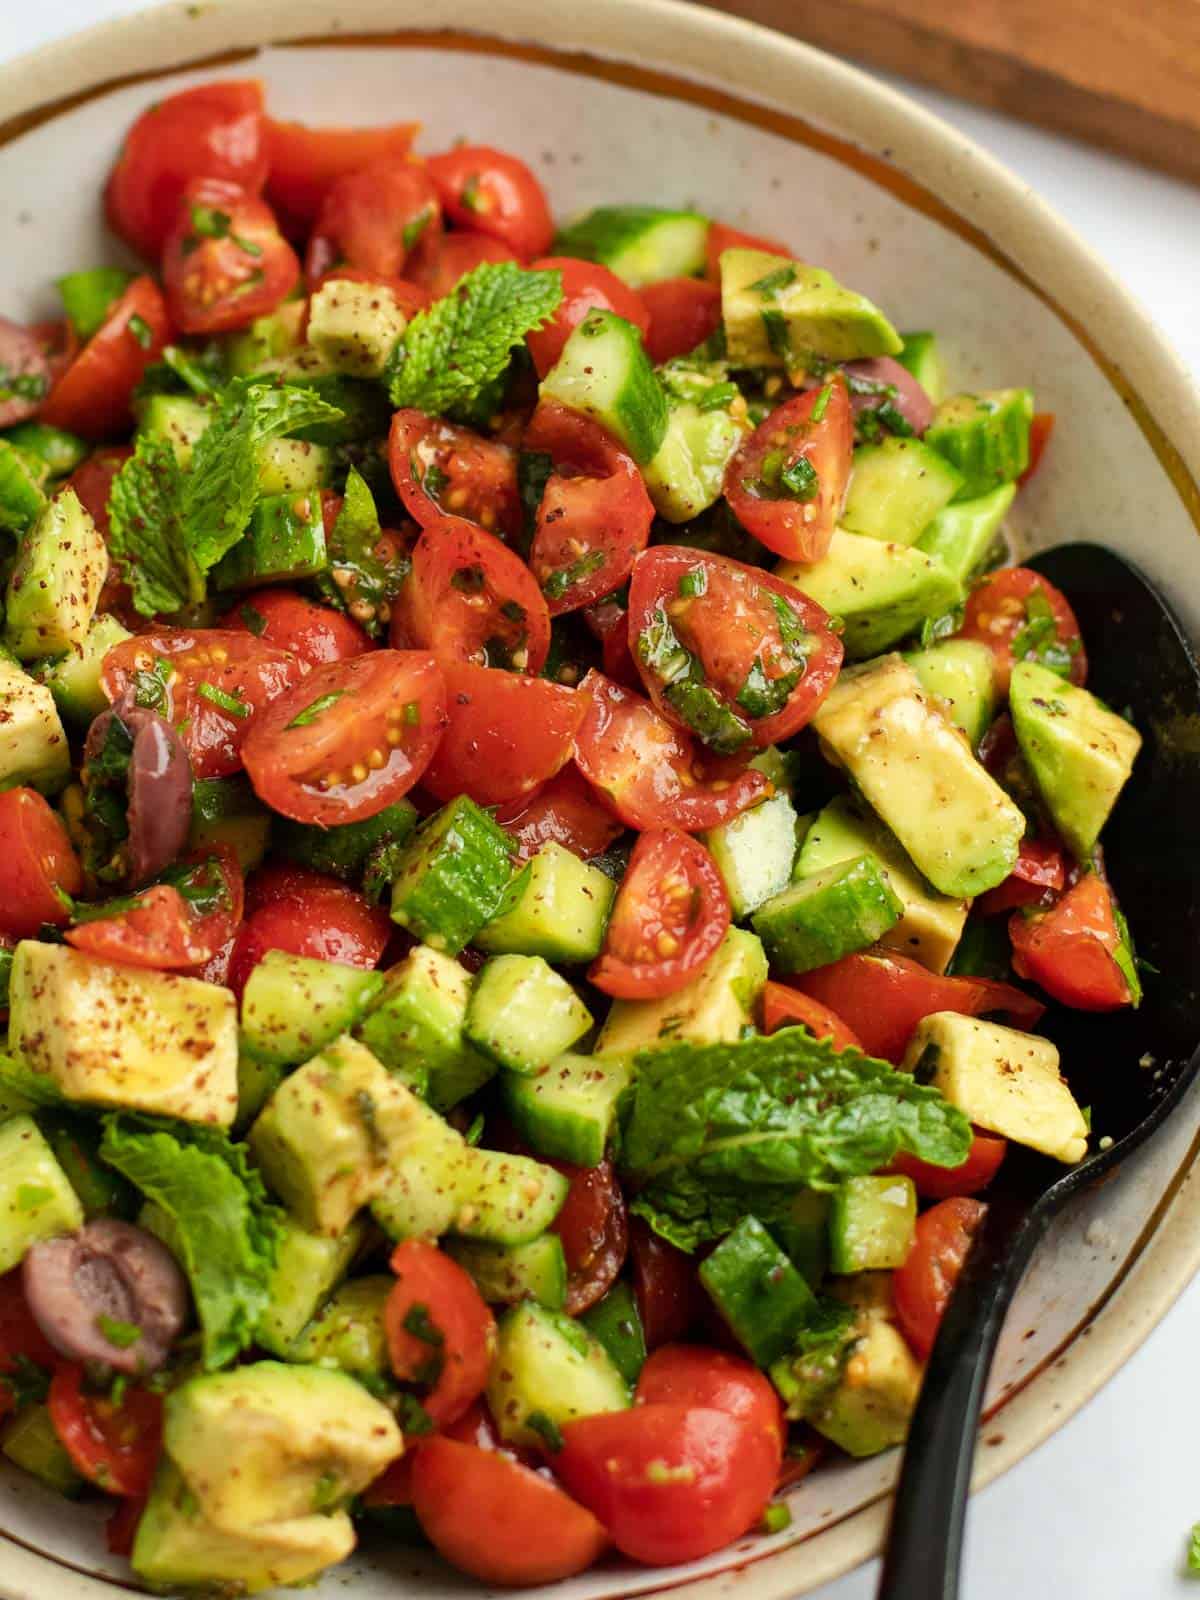 Up close view of Jerusalem salad with tomatoes, cucumbers, avocado, and fresh herbs.